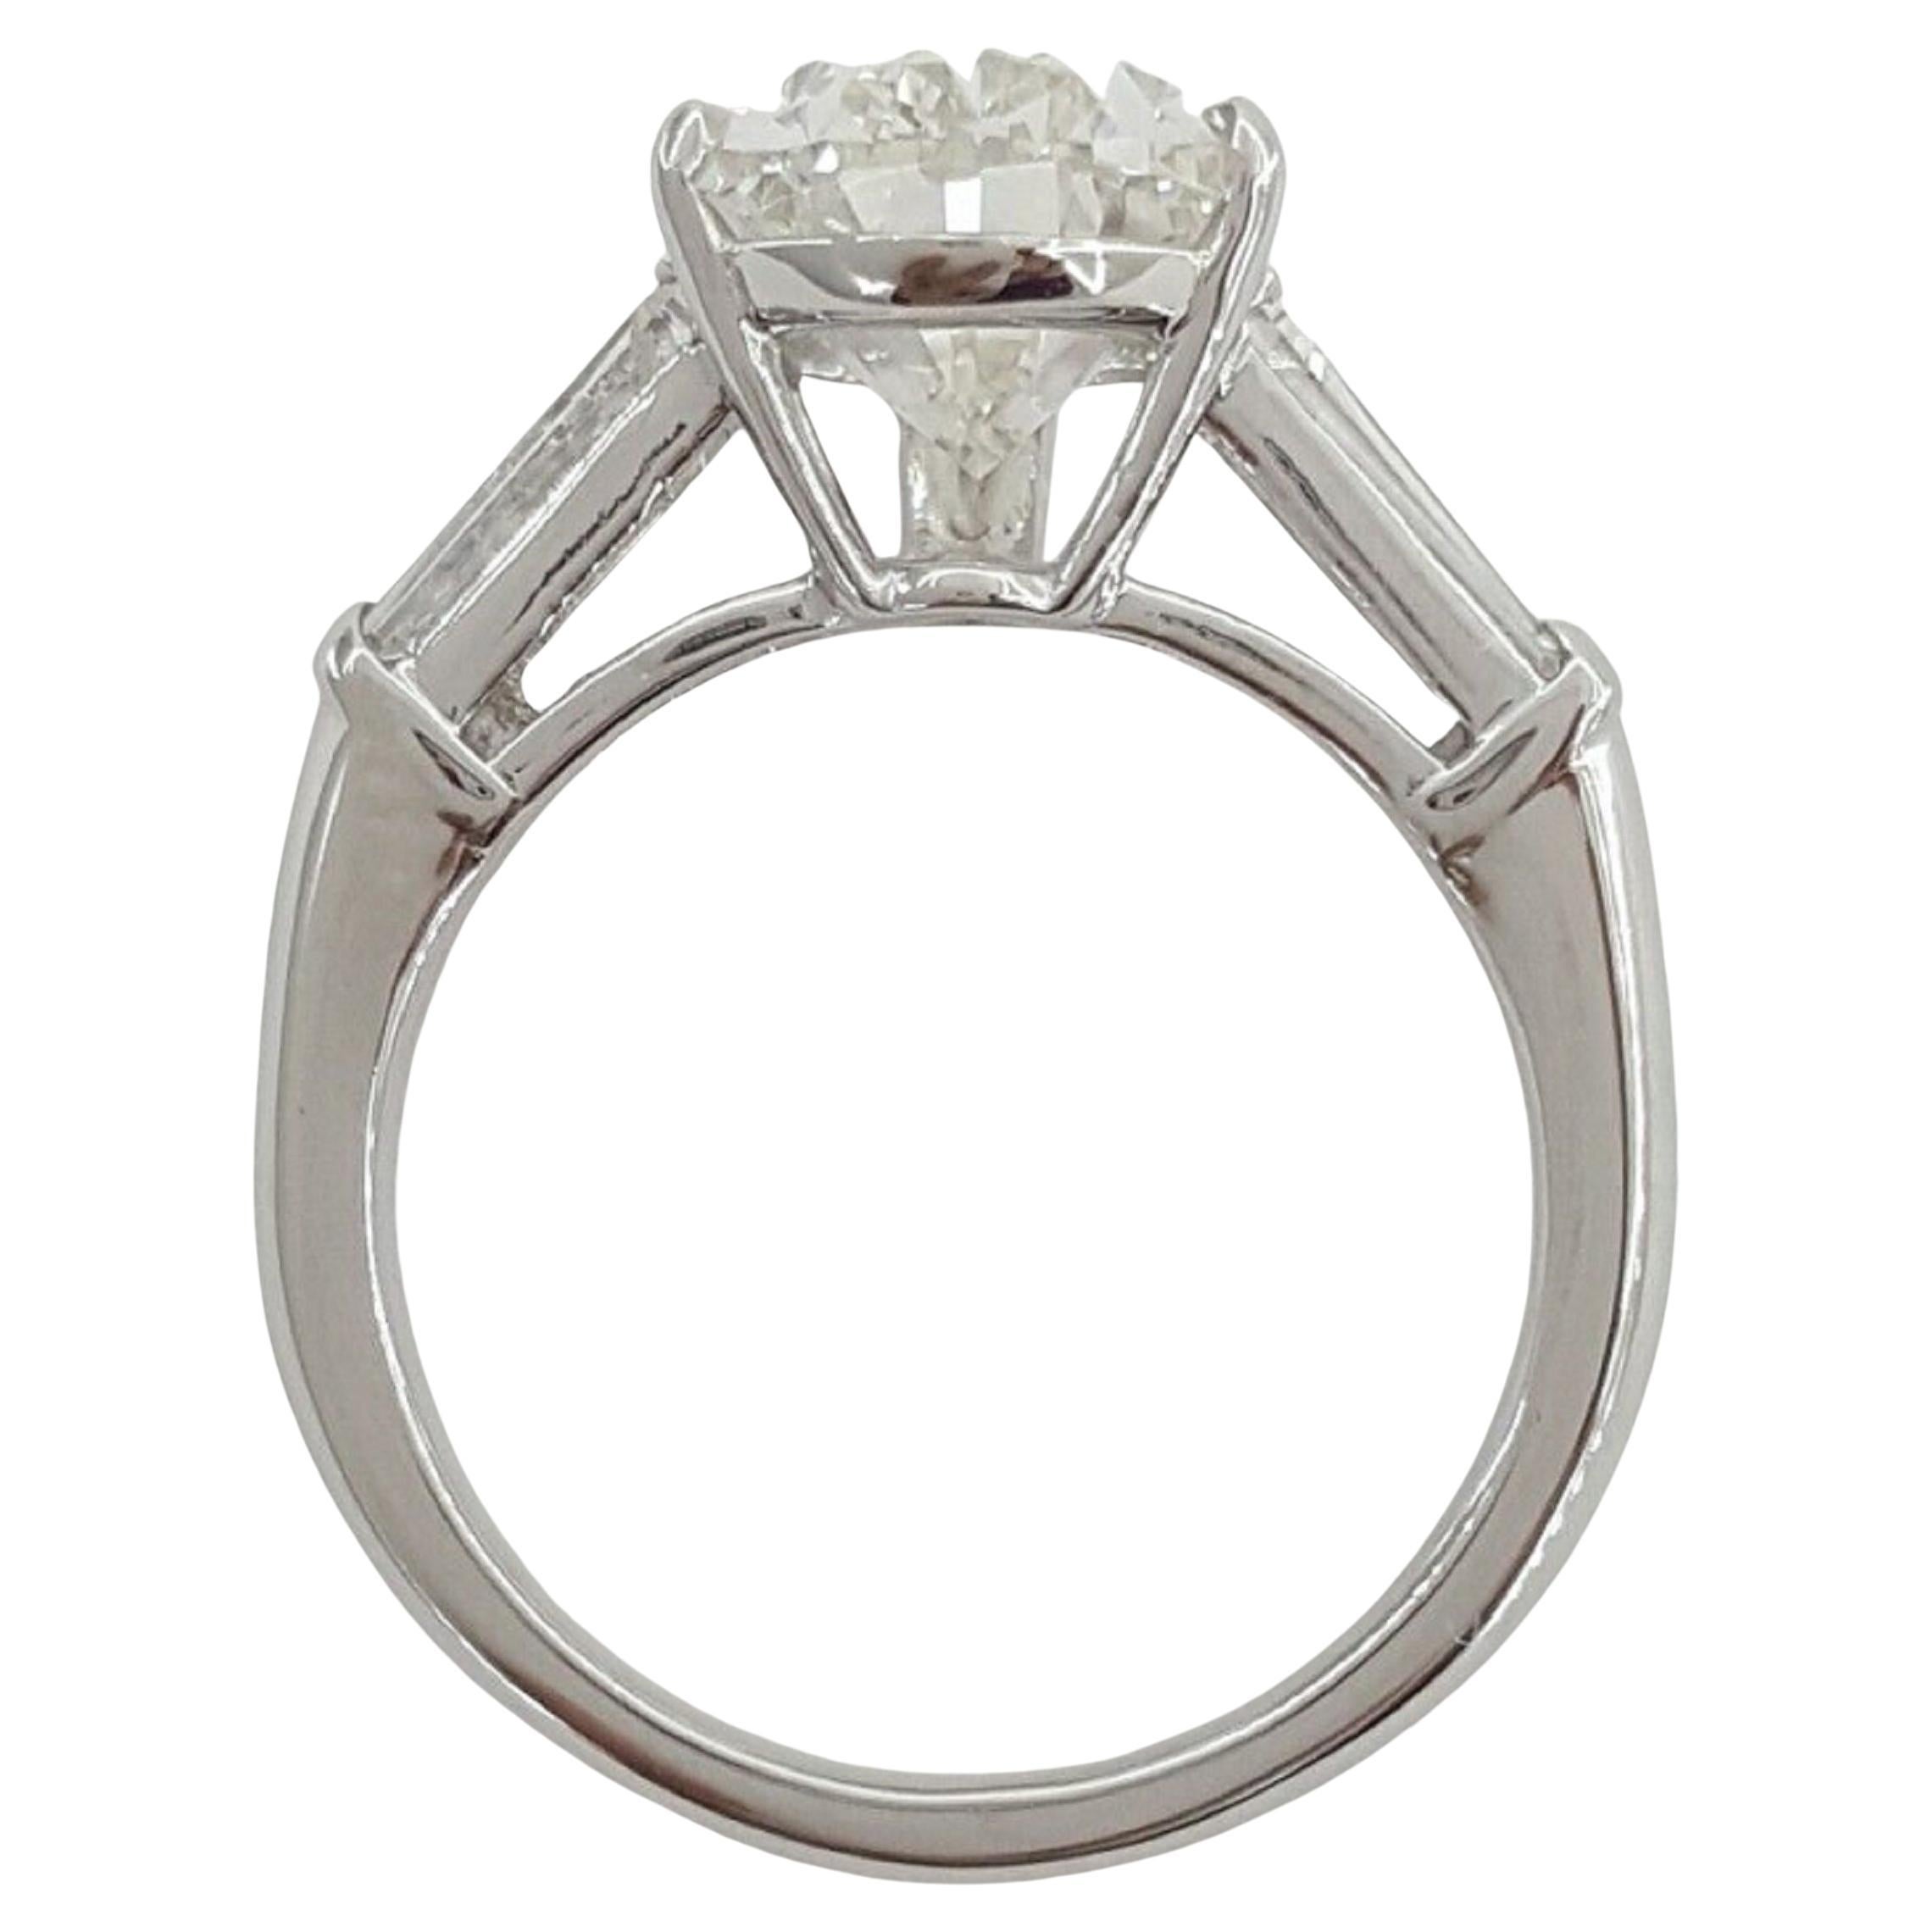 Certainly, here is the description for the ring with a platinum setting and two tapered baguettes on the sides of the main diamond:

This exquisite ring features a stunning GIA certified Pear-shaped diamond as its centerpiece, creating an air of